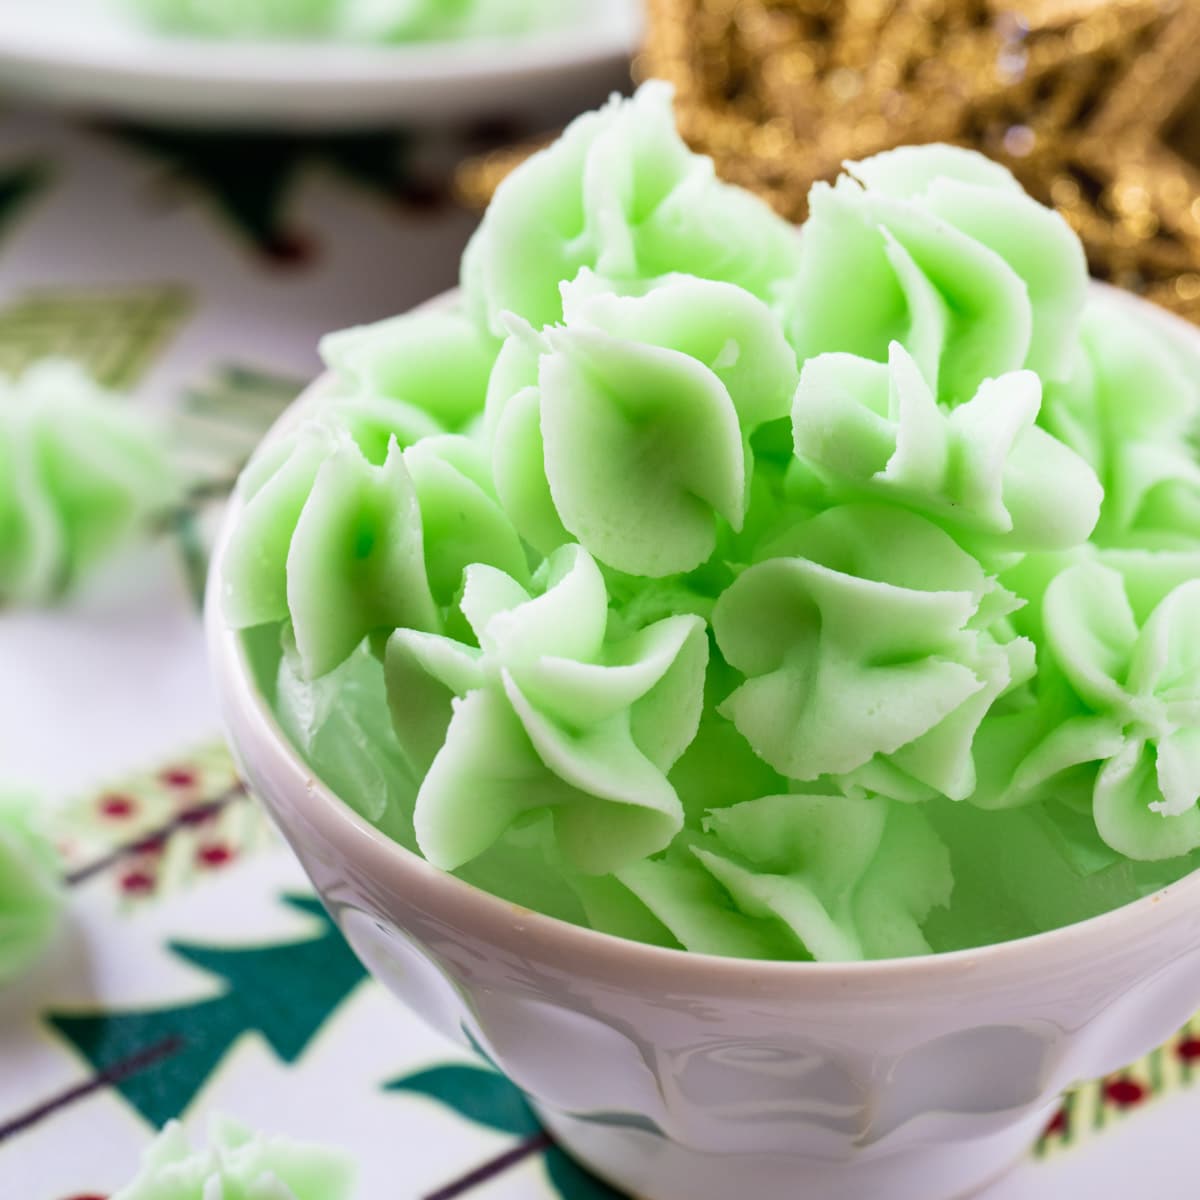 Green Cream Cheese Mints in a bowl.